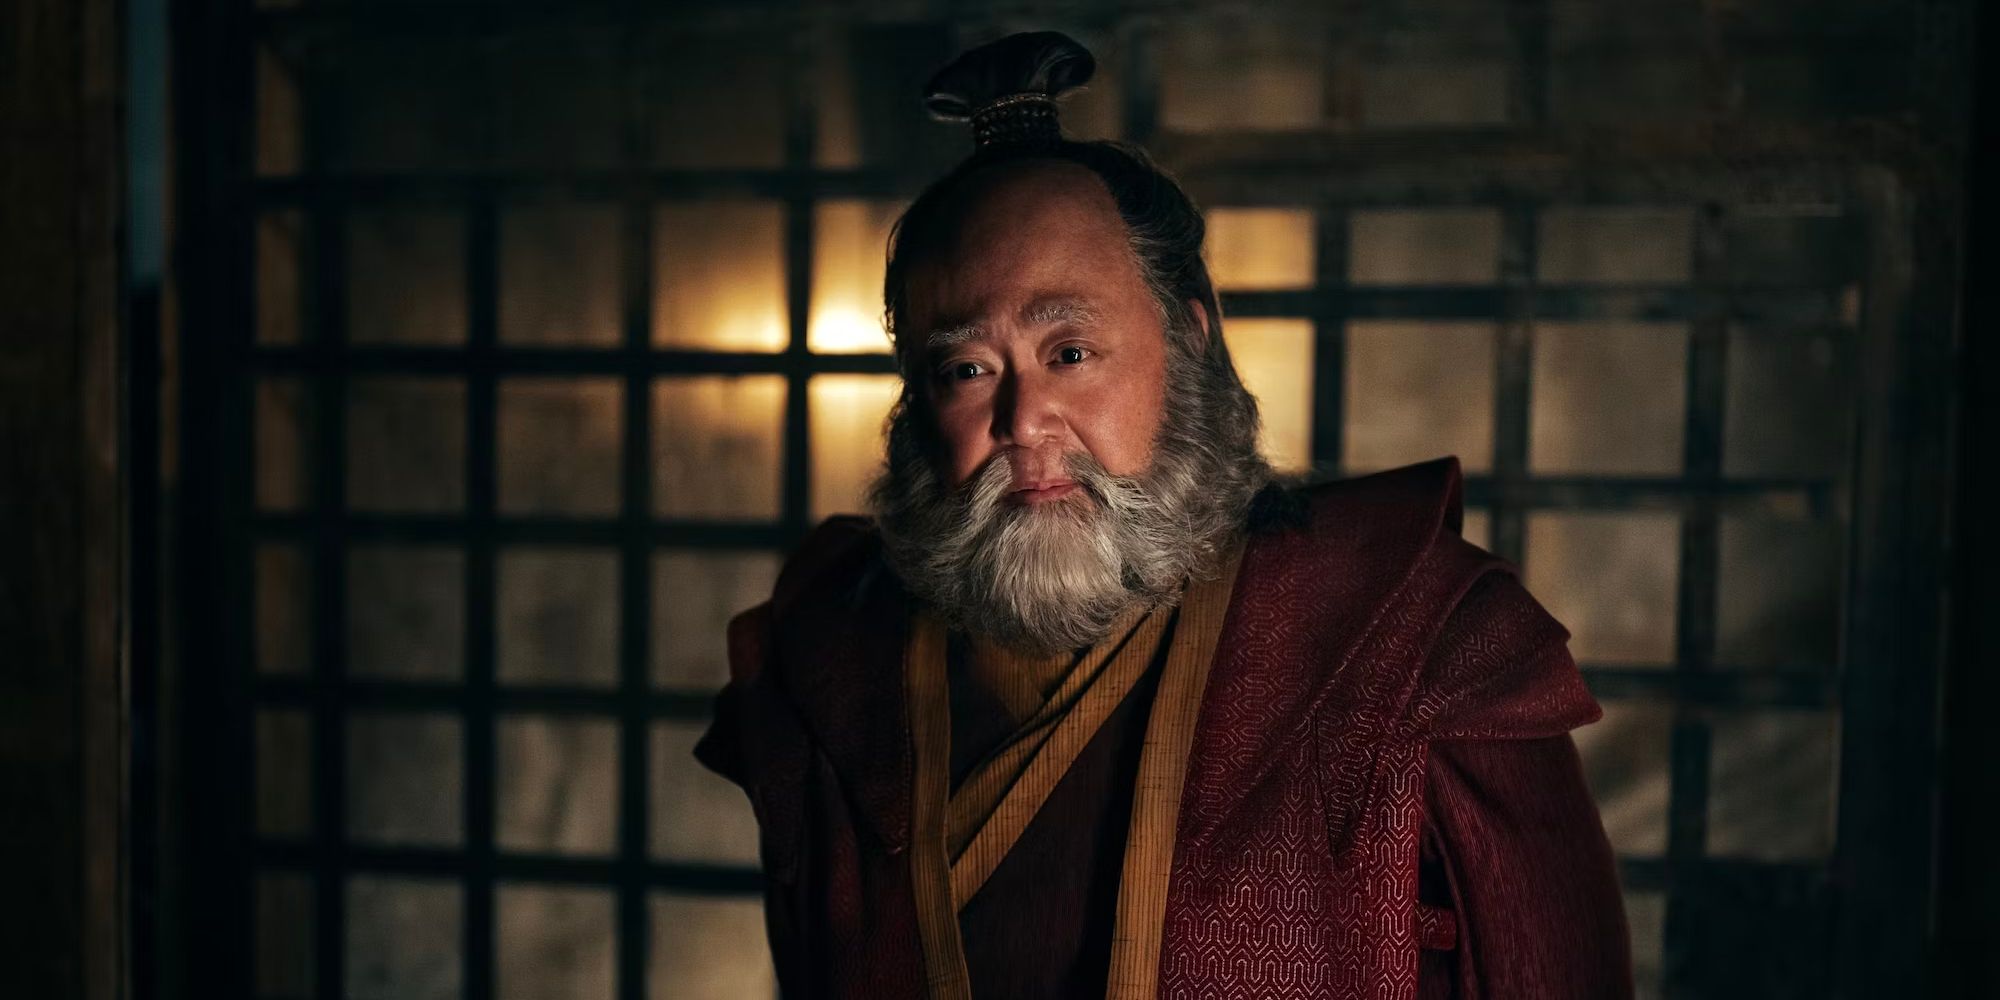 1 Scene In The Live-Action Avatar: The Last Airbender Trailer Should Ease Your Fears